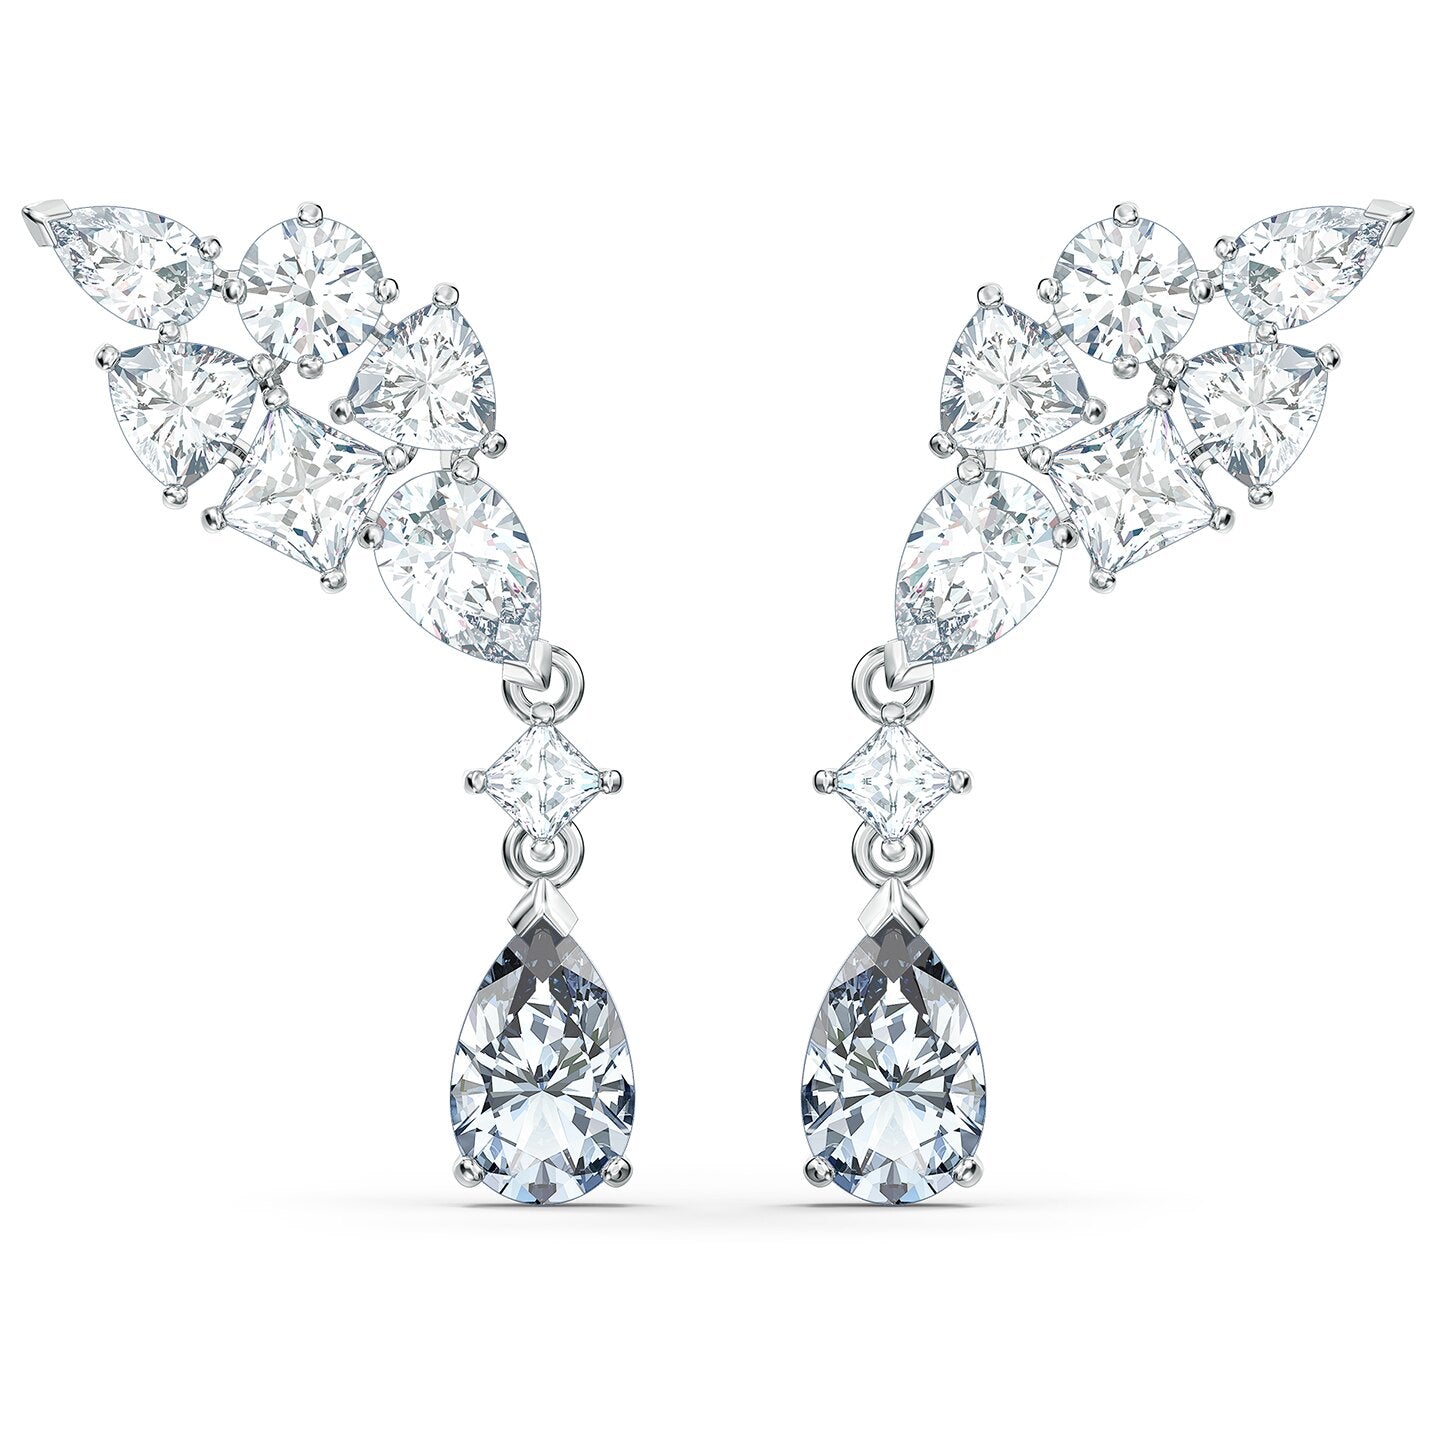 Swarovski Tennis Deluxe Cluster Mixed Pierced Earrings, White, Rhodium plated 5562086